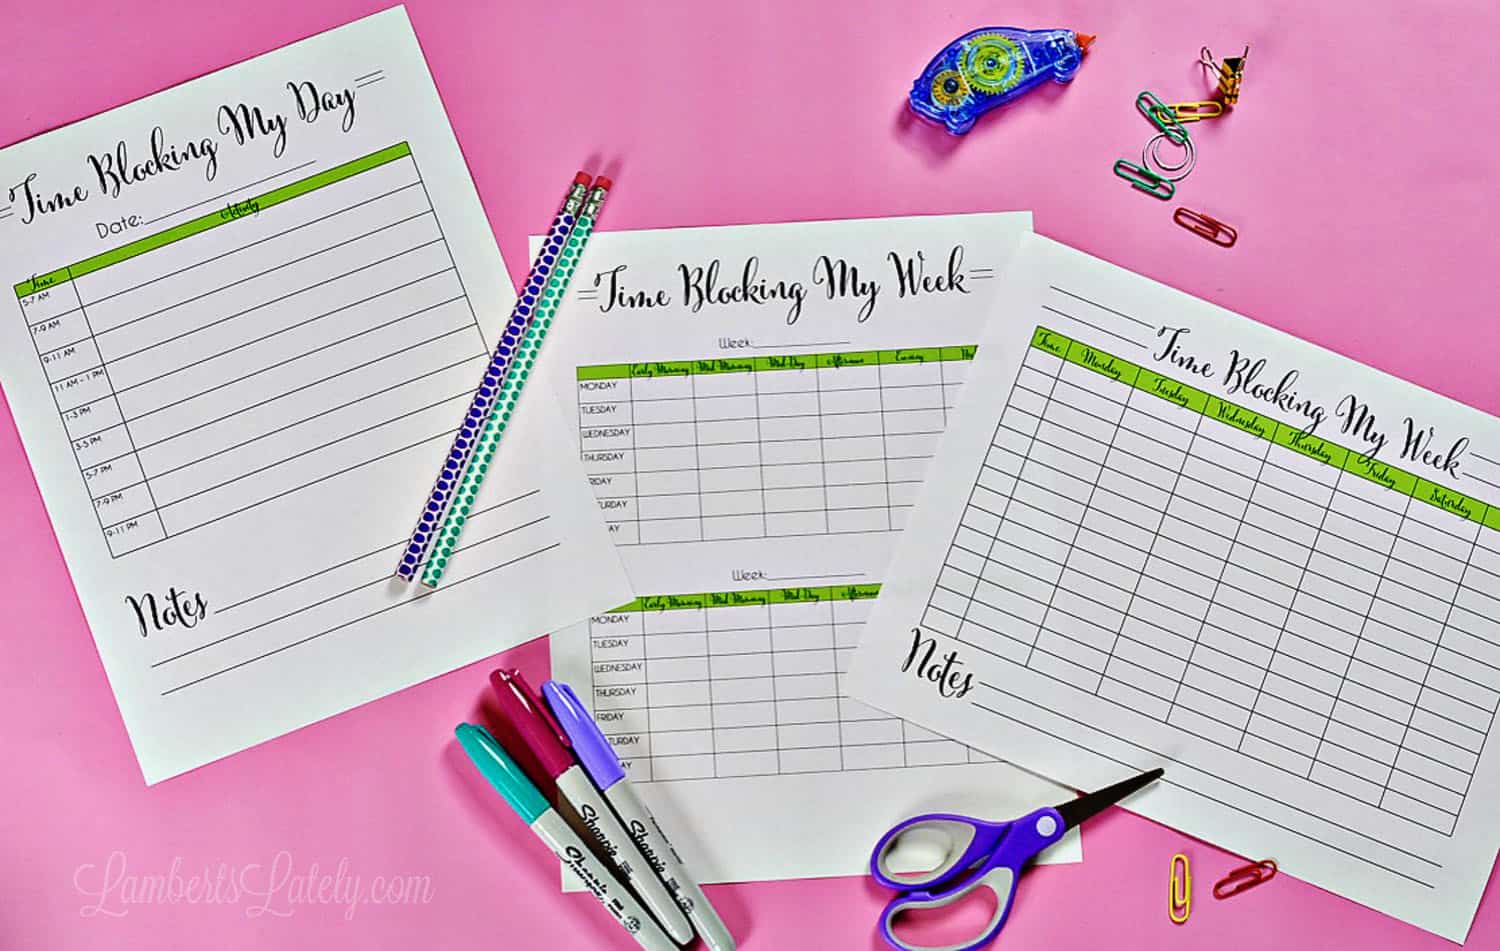 Using Time Blocking To Schedule (& printables!)